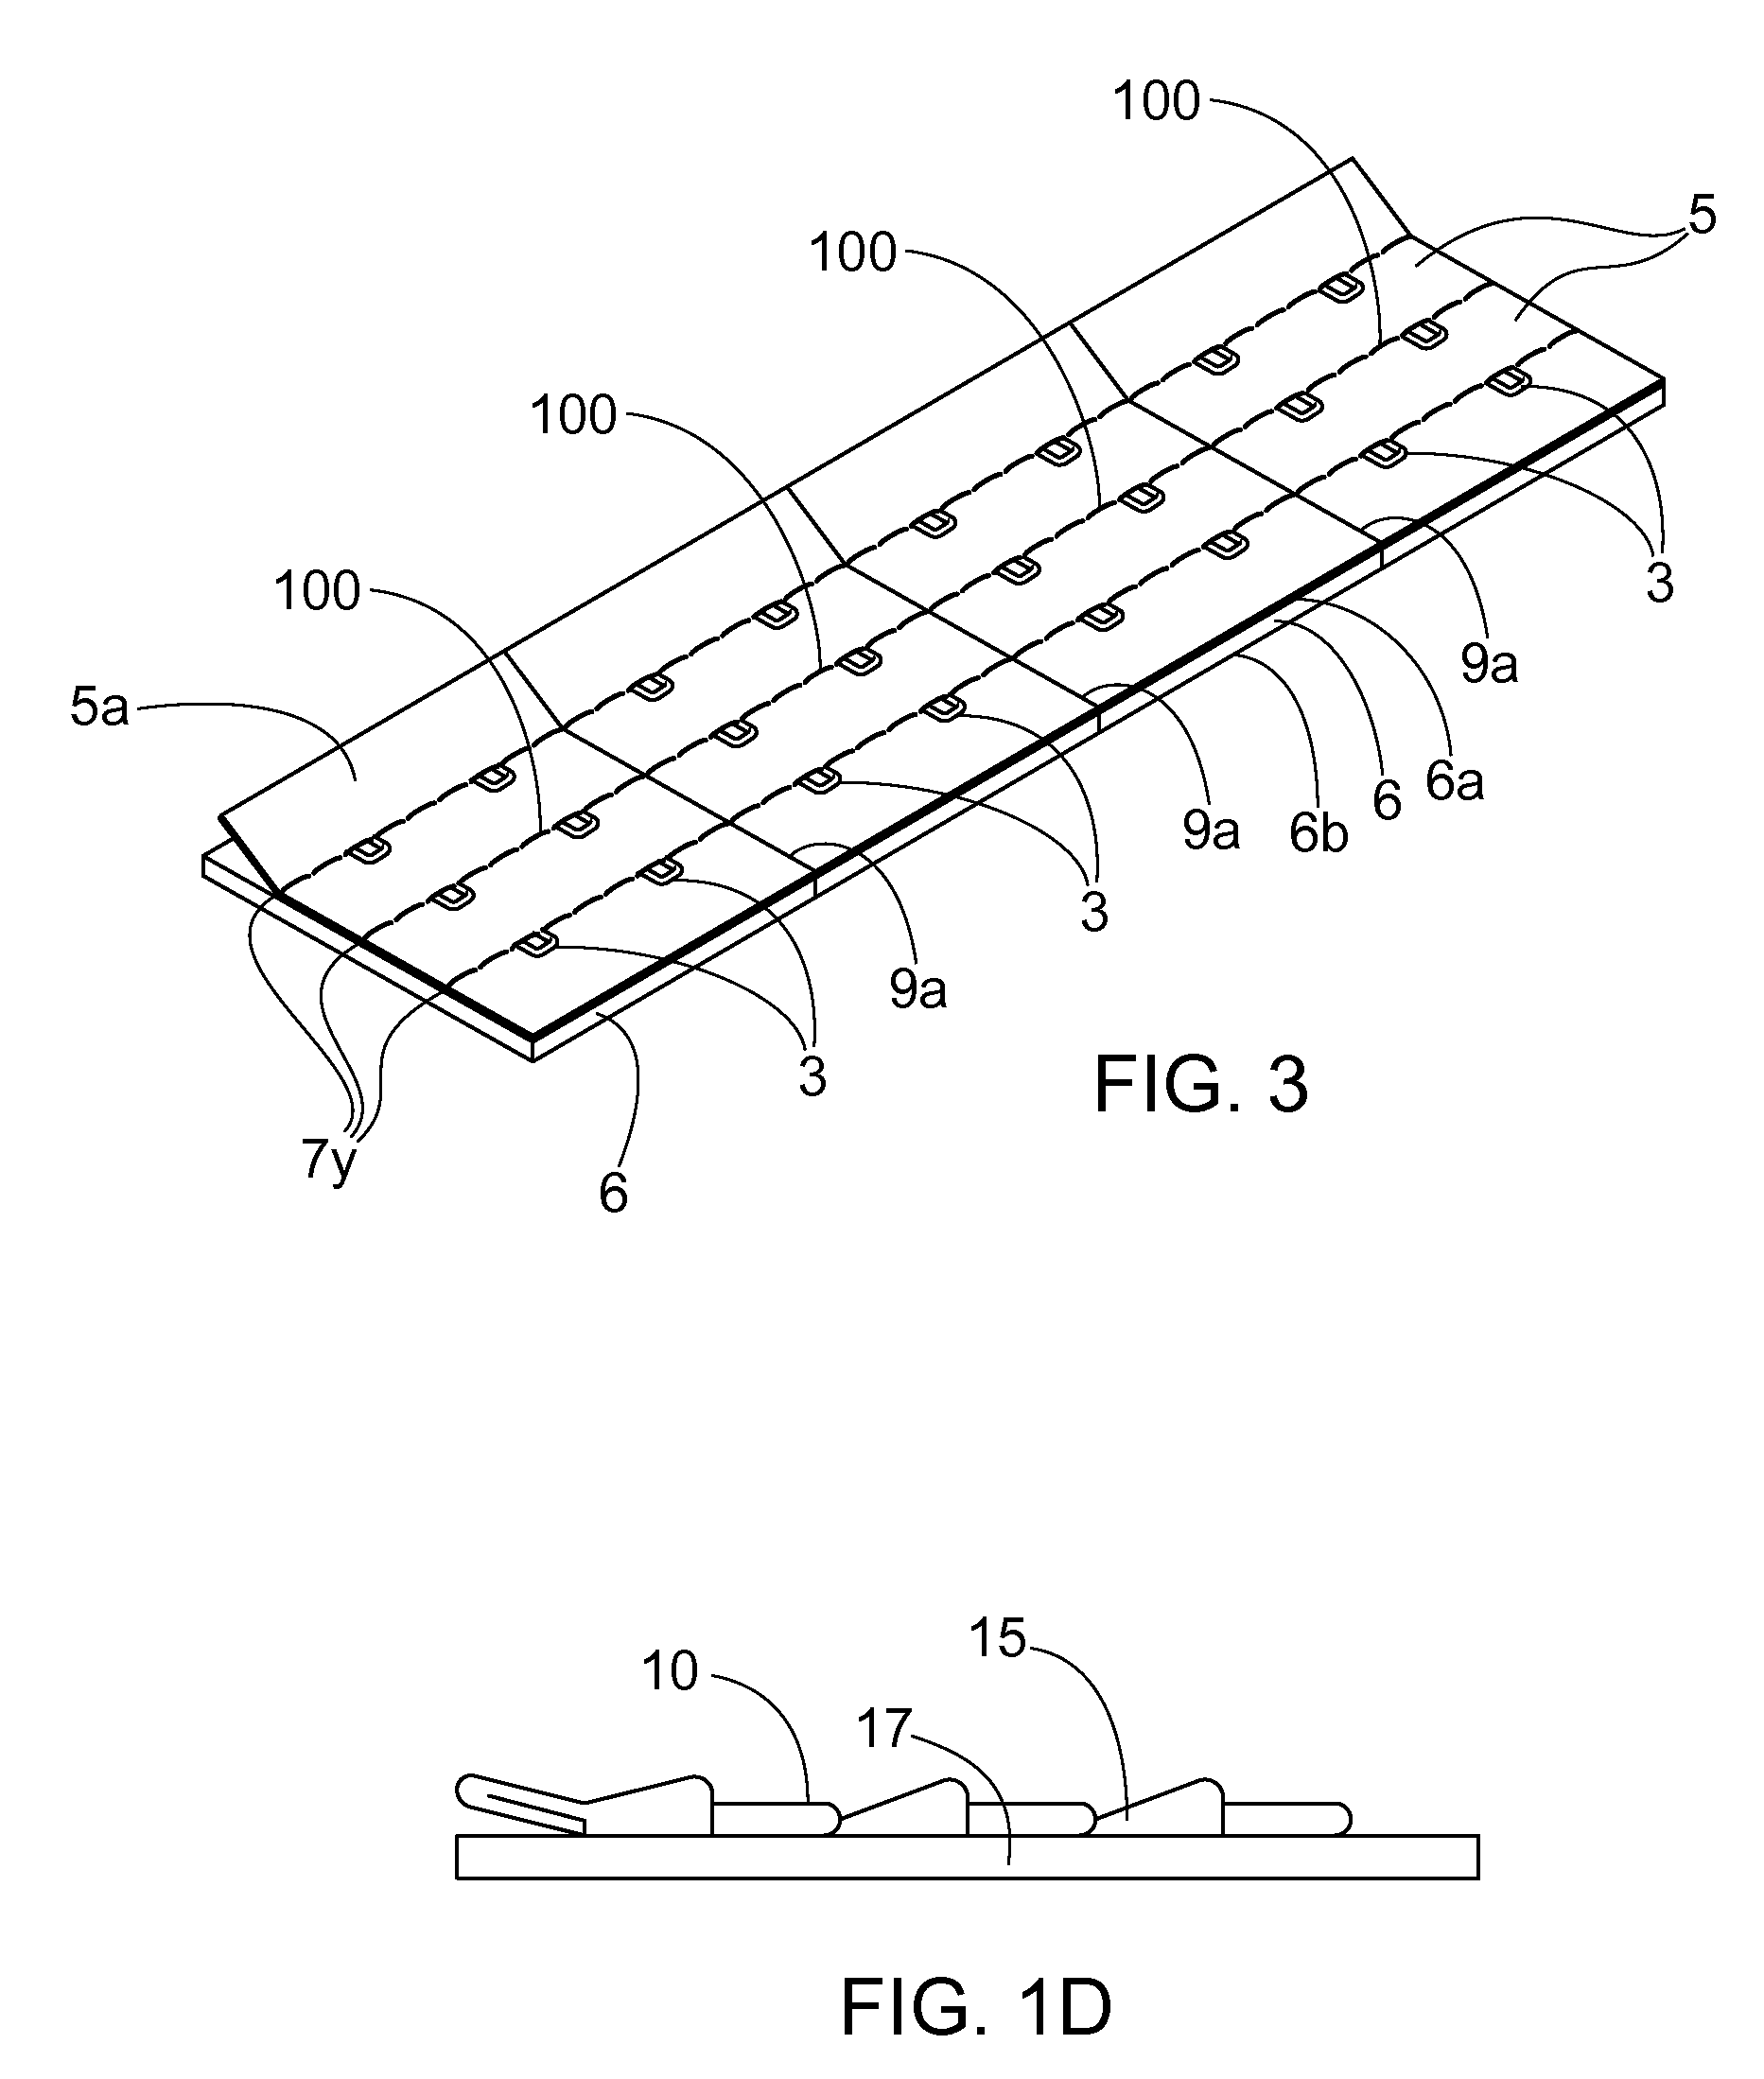 Apparatus and method for comfortably and dynamically adjusting the girth of a garment fastened by hook and eye